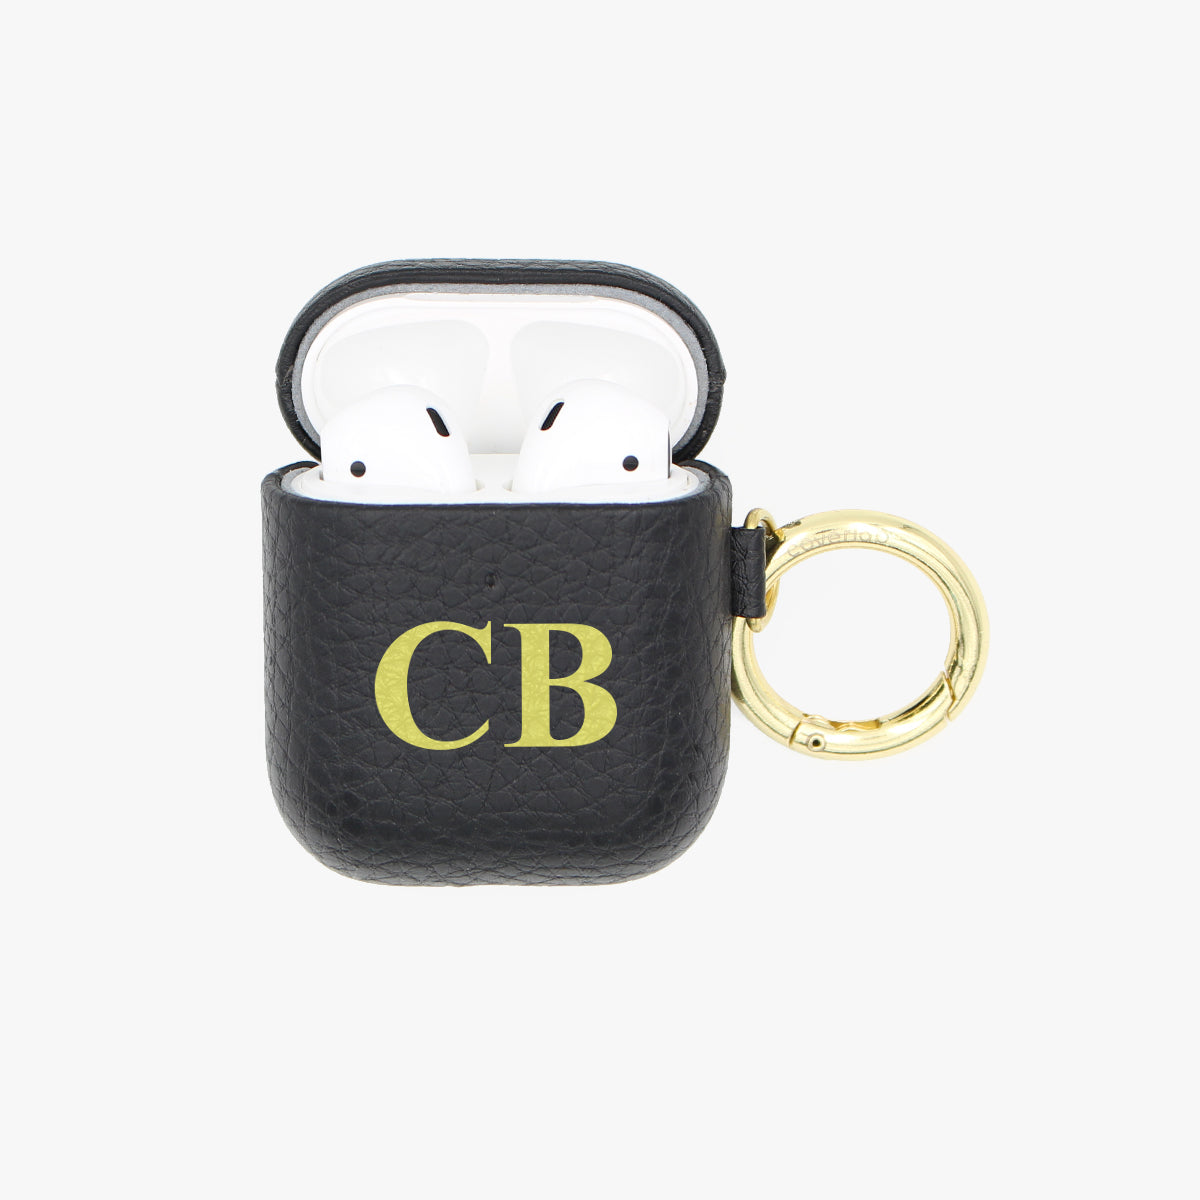 Thin Name Personalised Leather AirPods Case